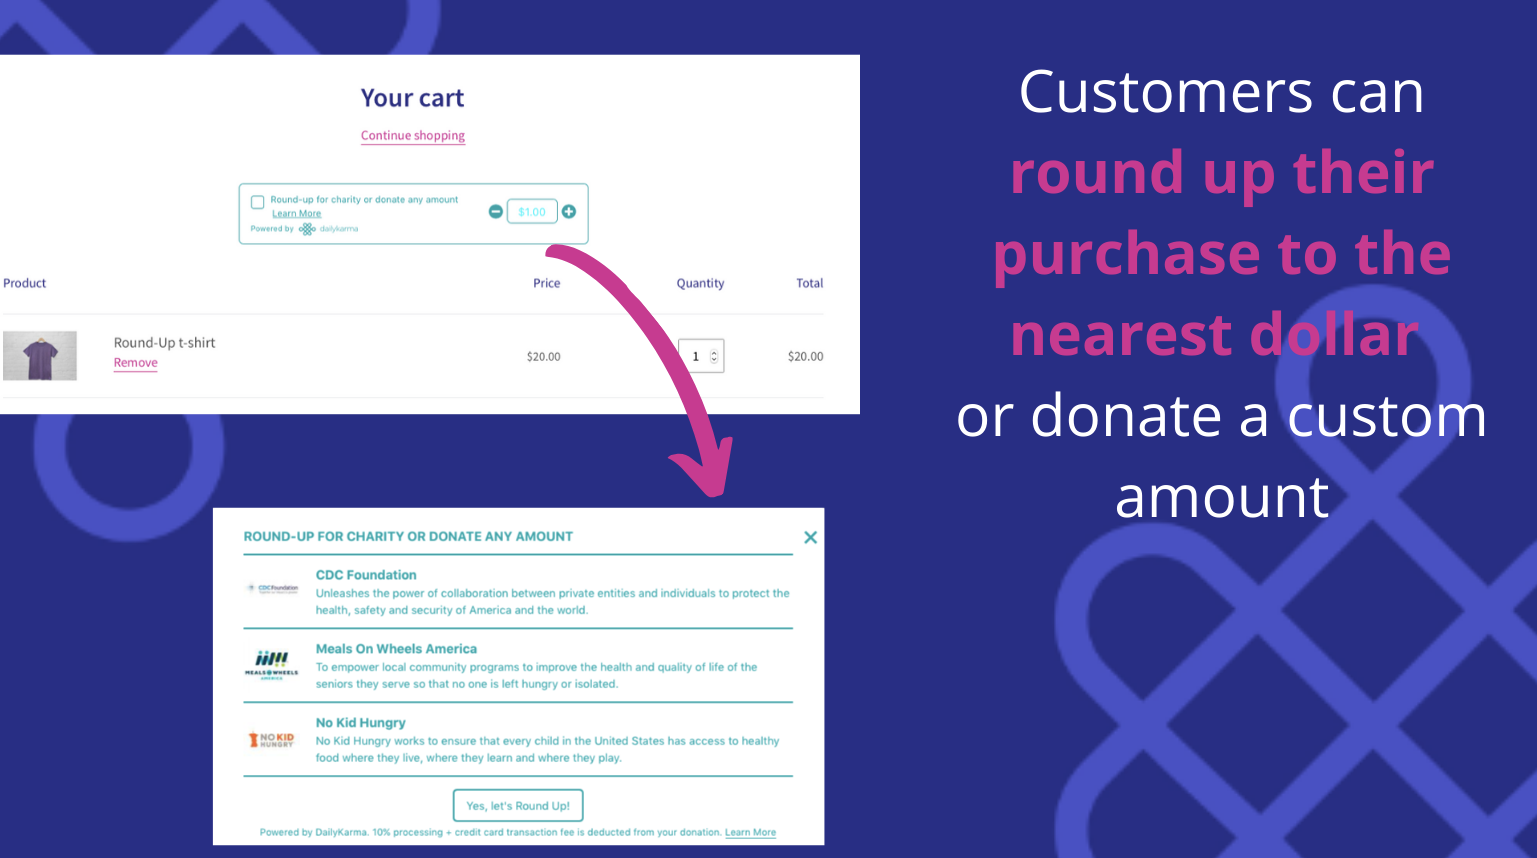 a screenshot of Shop for Good in action, which allows consumers to donate a custom amount of round up to the nearest dollar